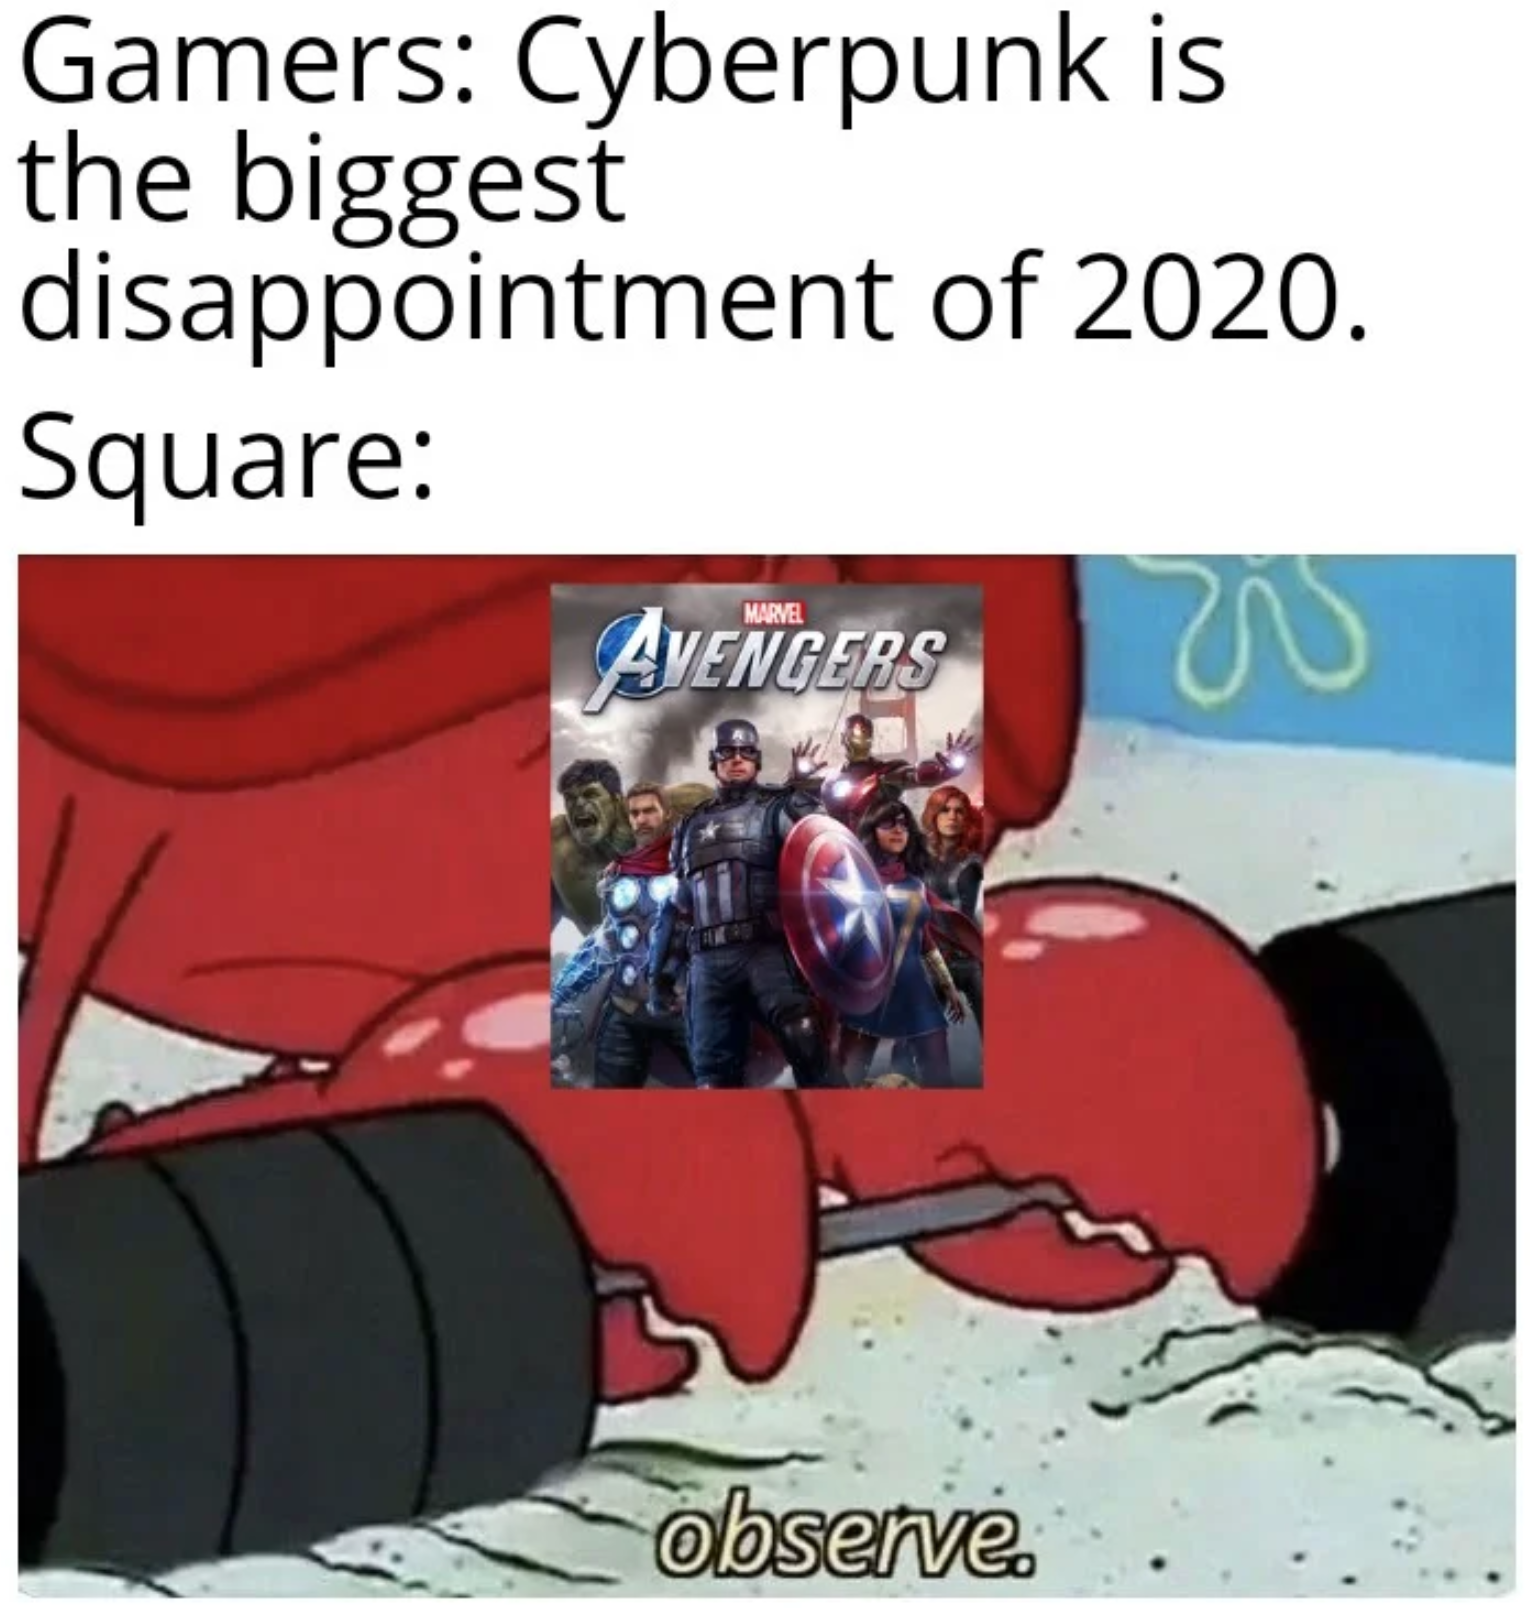 funny gaming memes - Video game - Gamers Cyberpunk is the biggest disappointment of 2020. Square Avengers 3 observe.